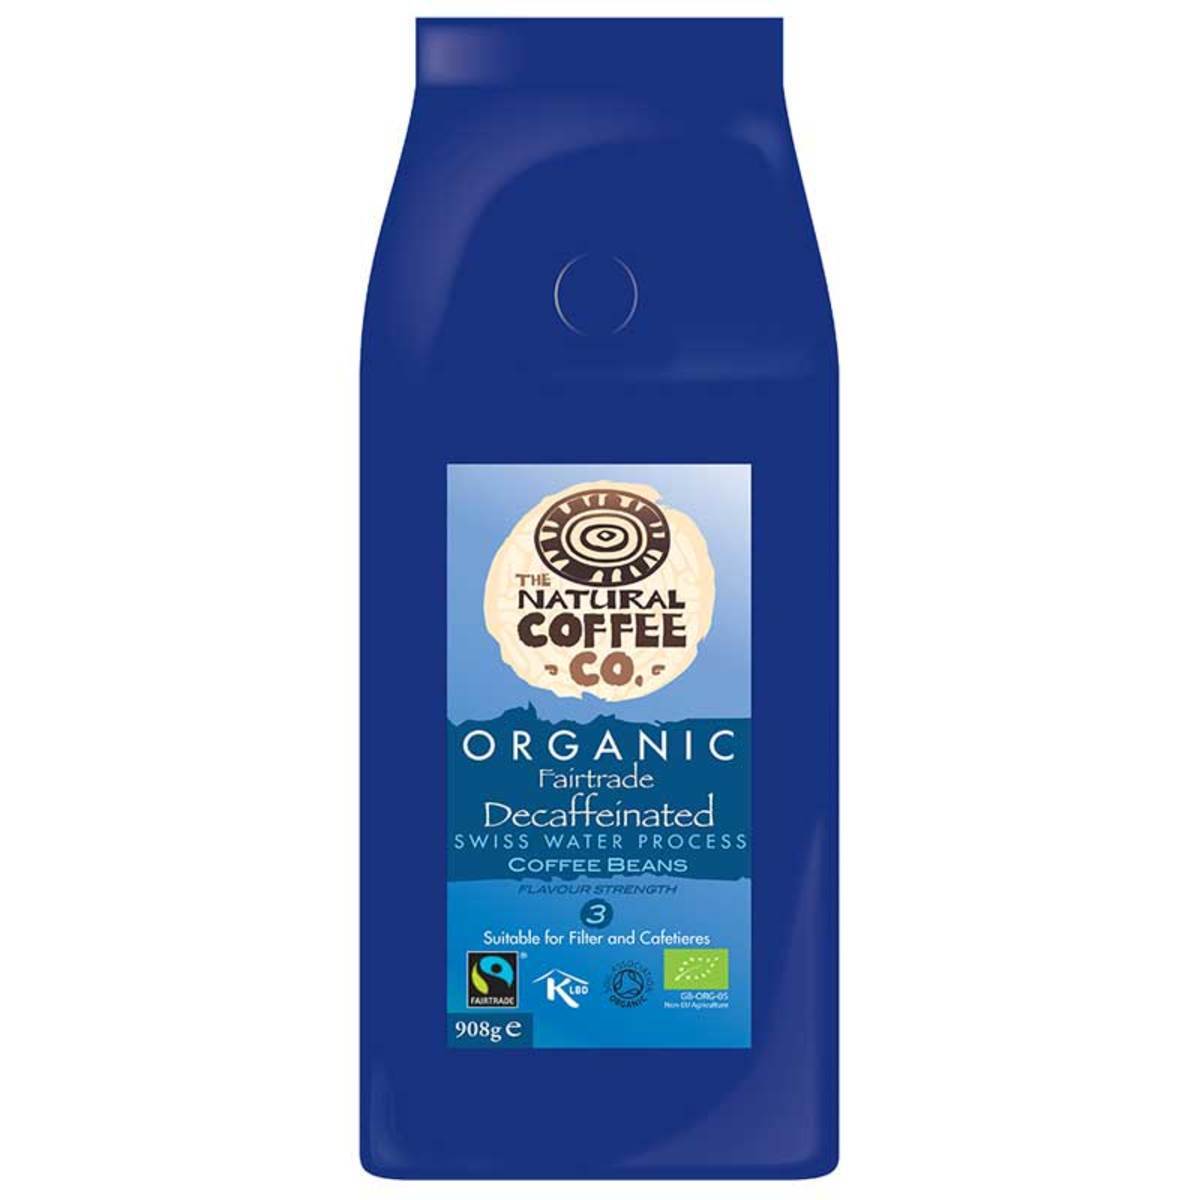 The Natural Coffee Co. Organic Decaffeinated Swiss Water Processed Coffee, 908g